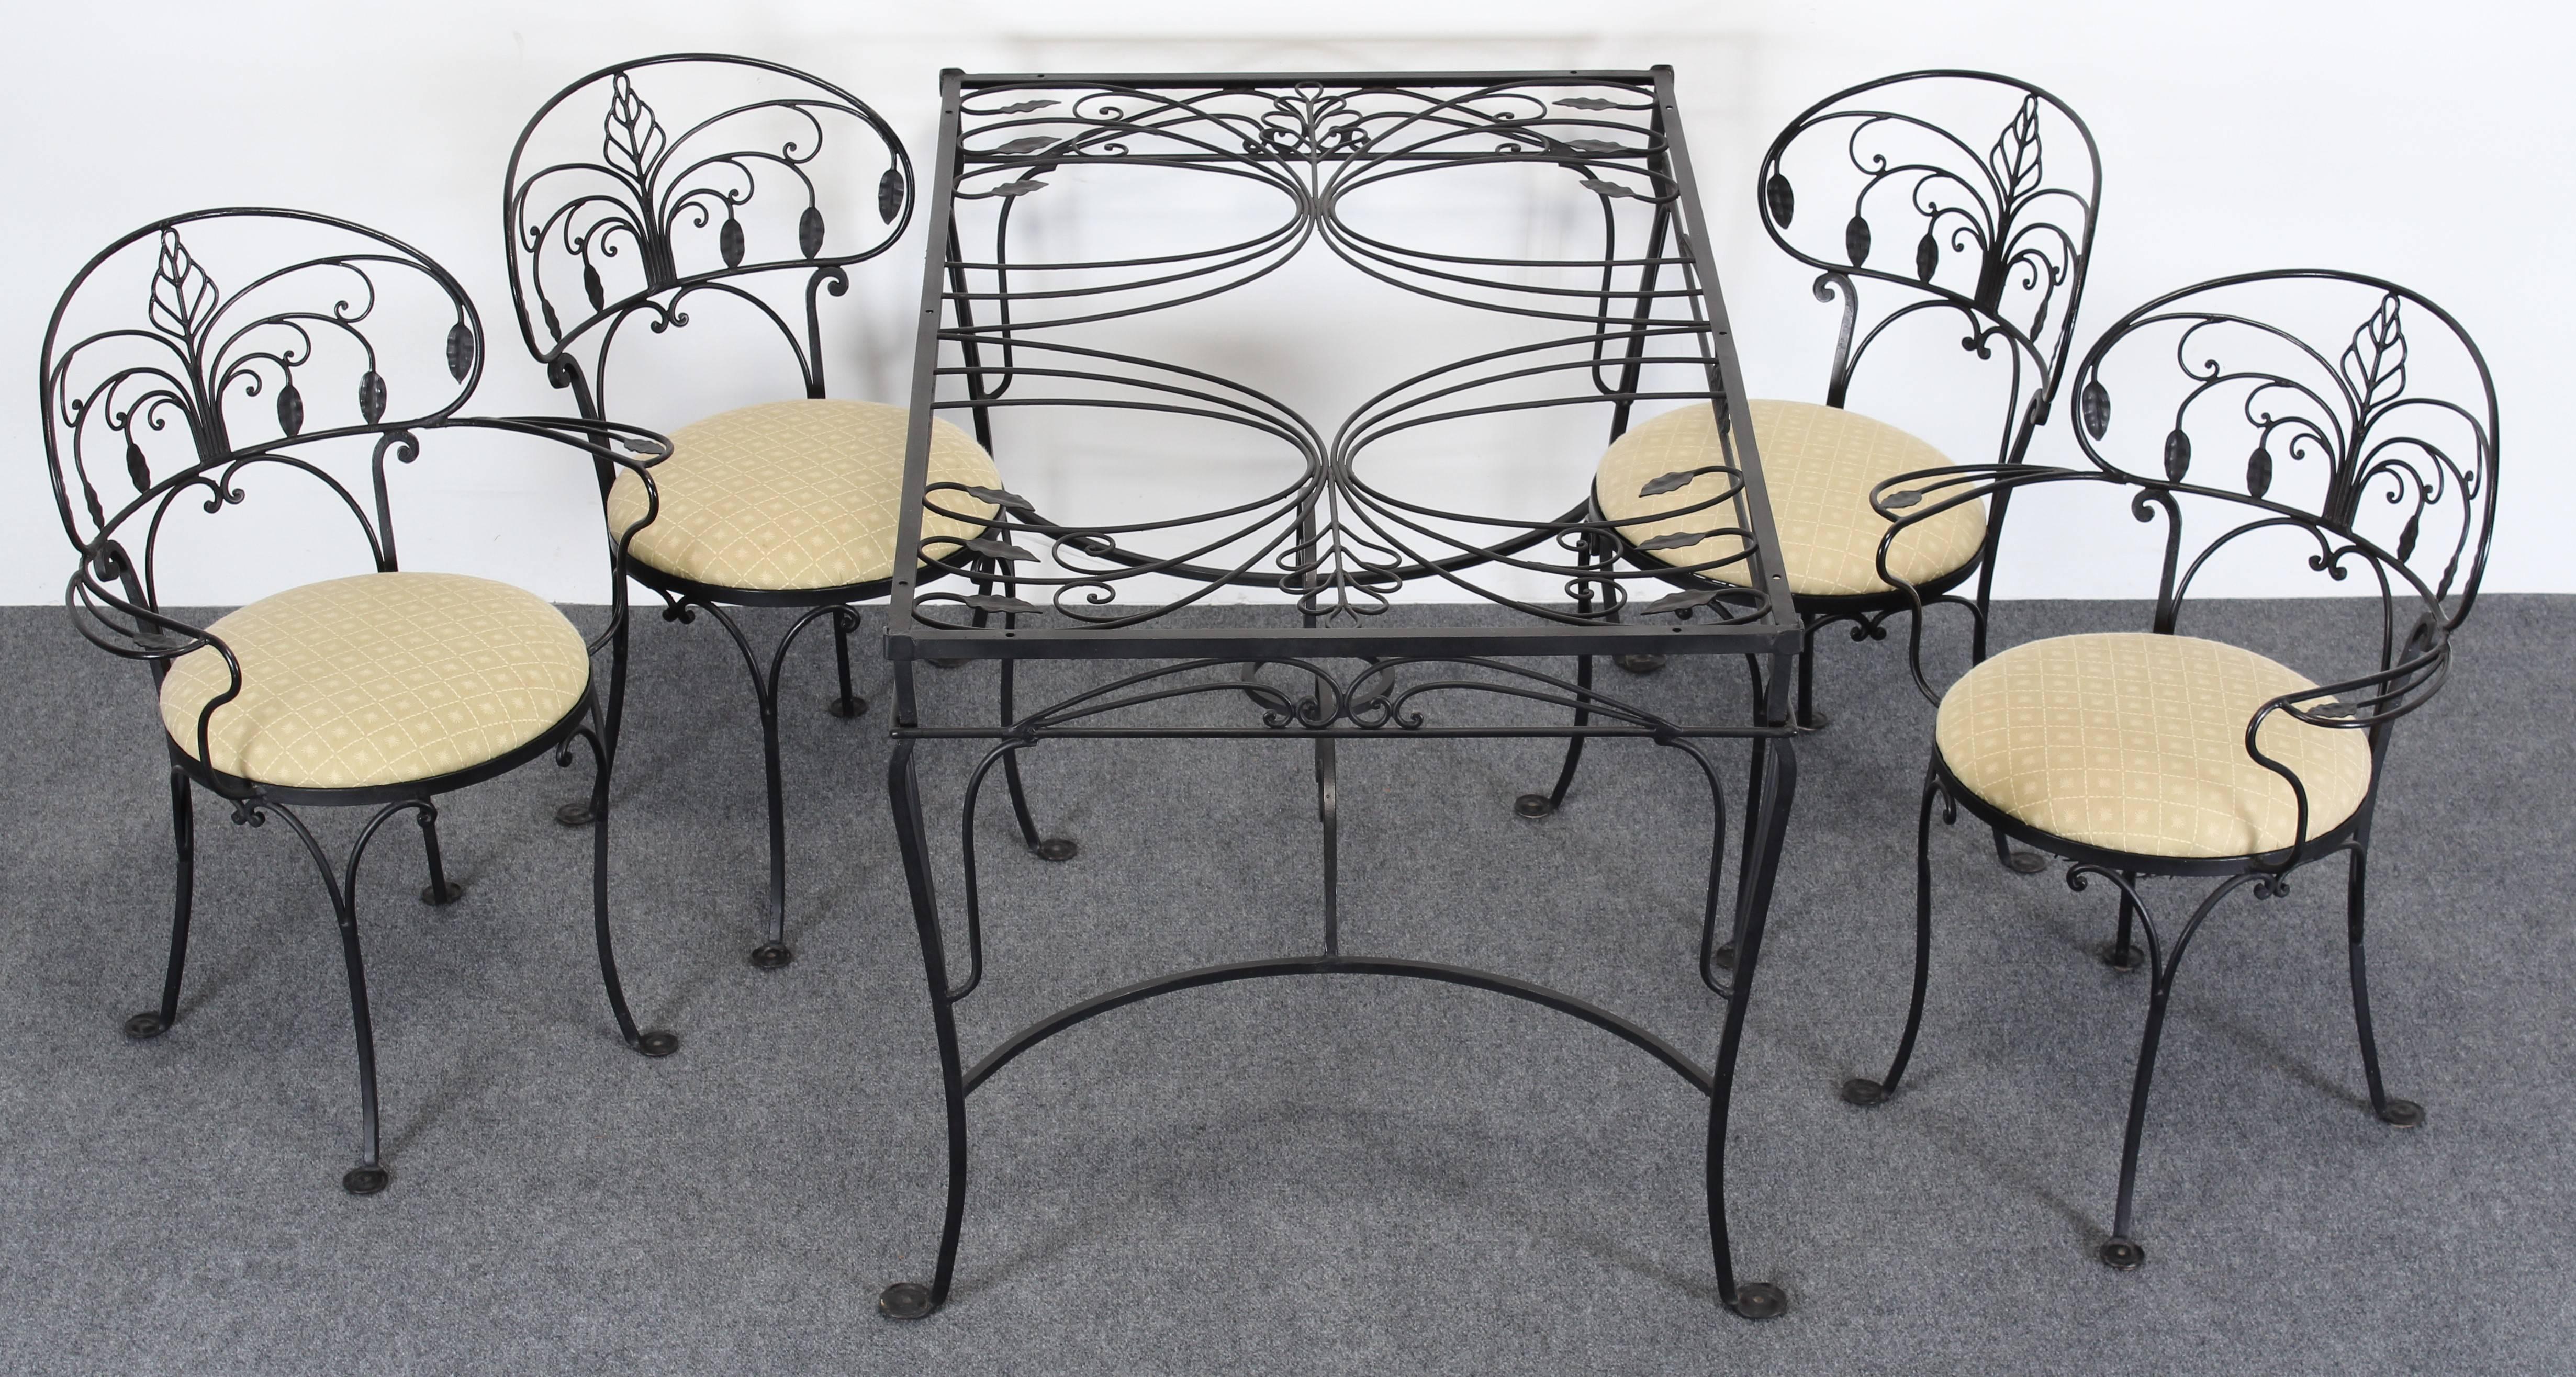 Vintage five-piece Salterini Florentine painted wrought iron dining set from the 1940s.
The set consists of two armchairs and two side chairs. The wrought iron rectangular dining table has an ornate leaf design. The Salterini set has the trademark